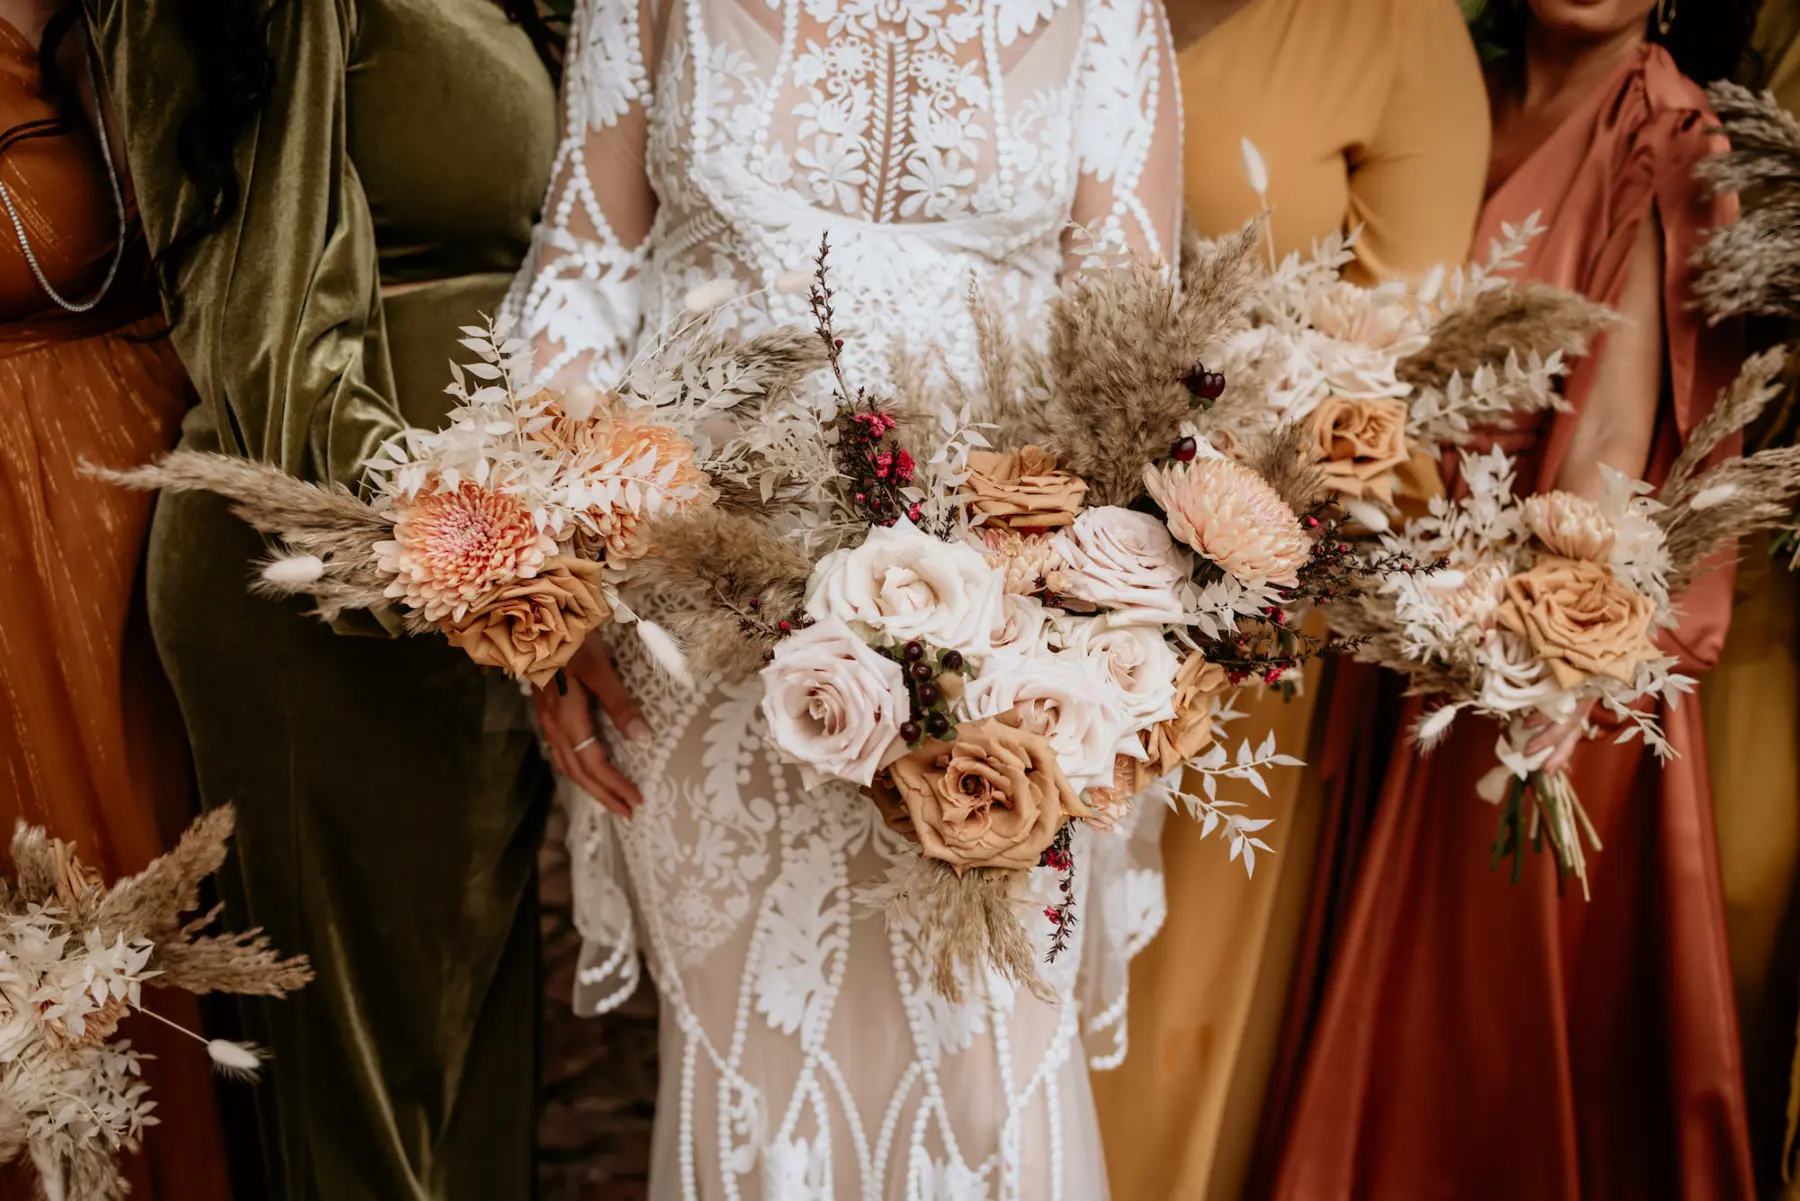 White Roses, Pink Chrysanthemums, and Dried Florals Fall Boho Wedding Bouquet Inspiration